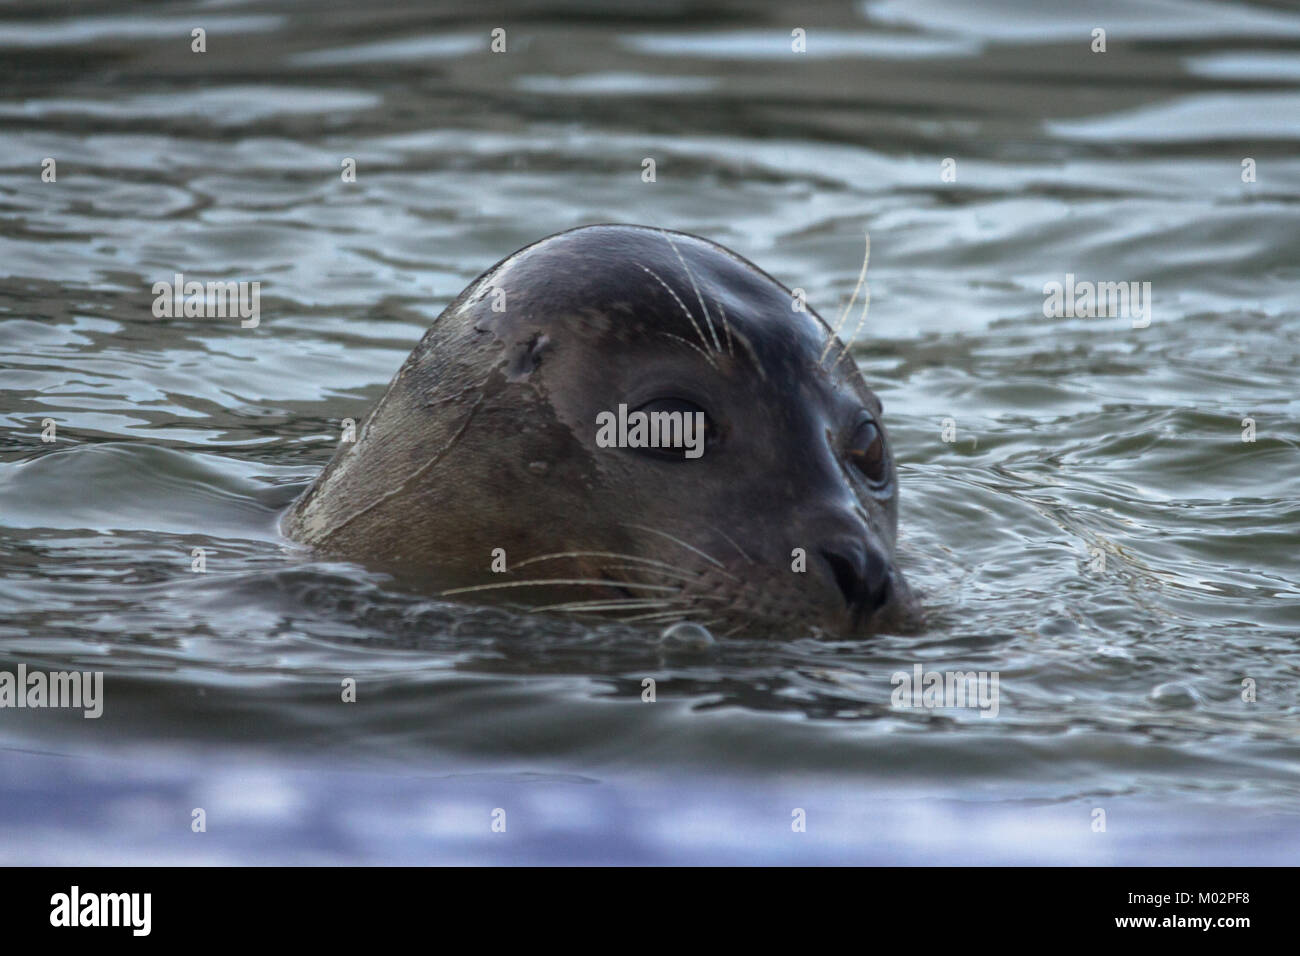 Common Seal in Water - Seal poking its head out of the water looking at the camera in Hunstanton, UK Stock Photo